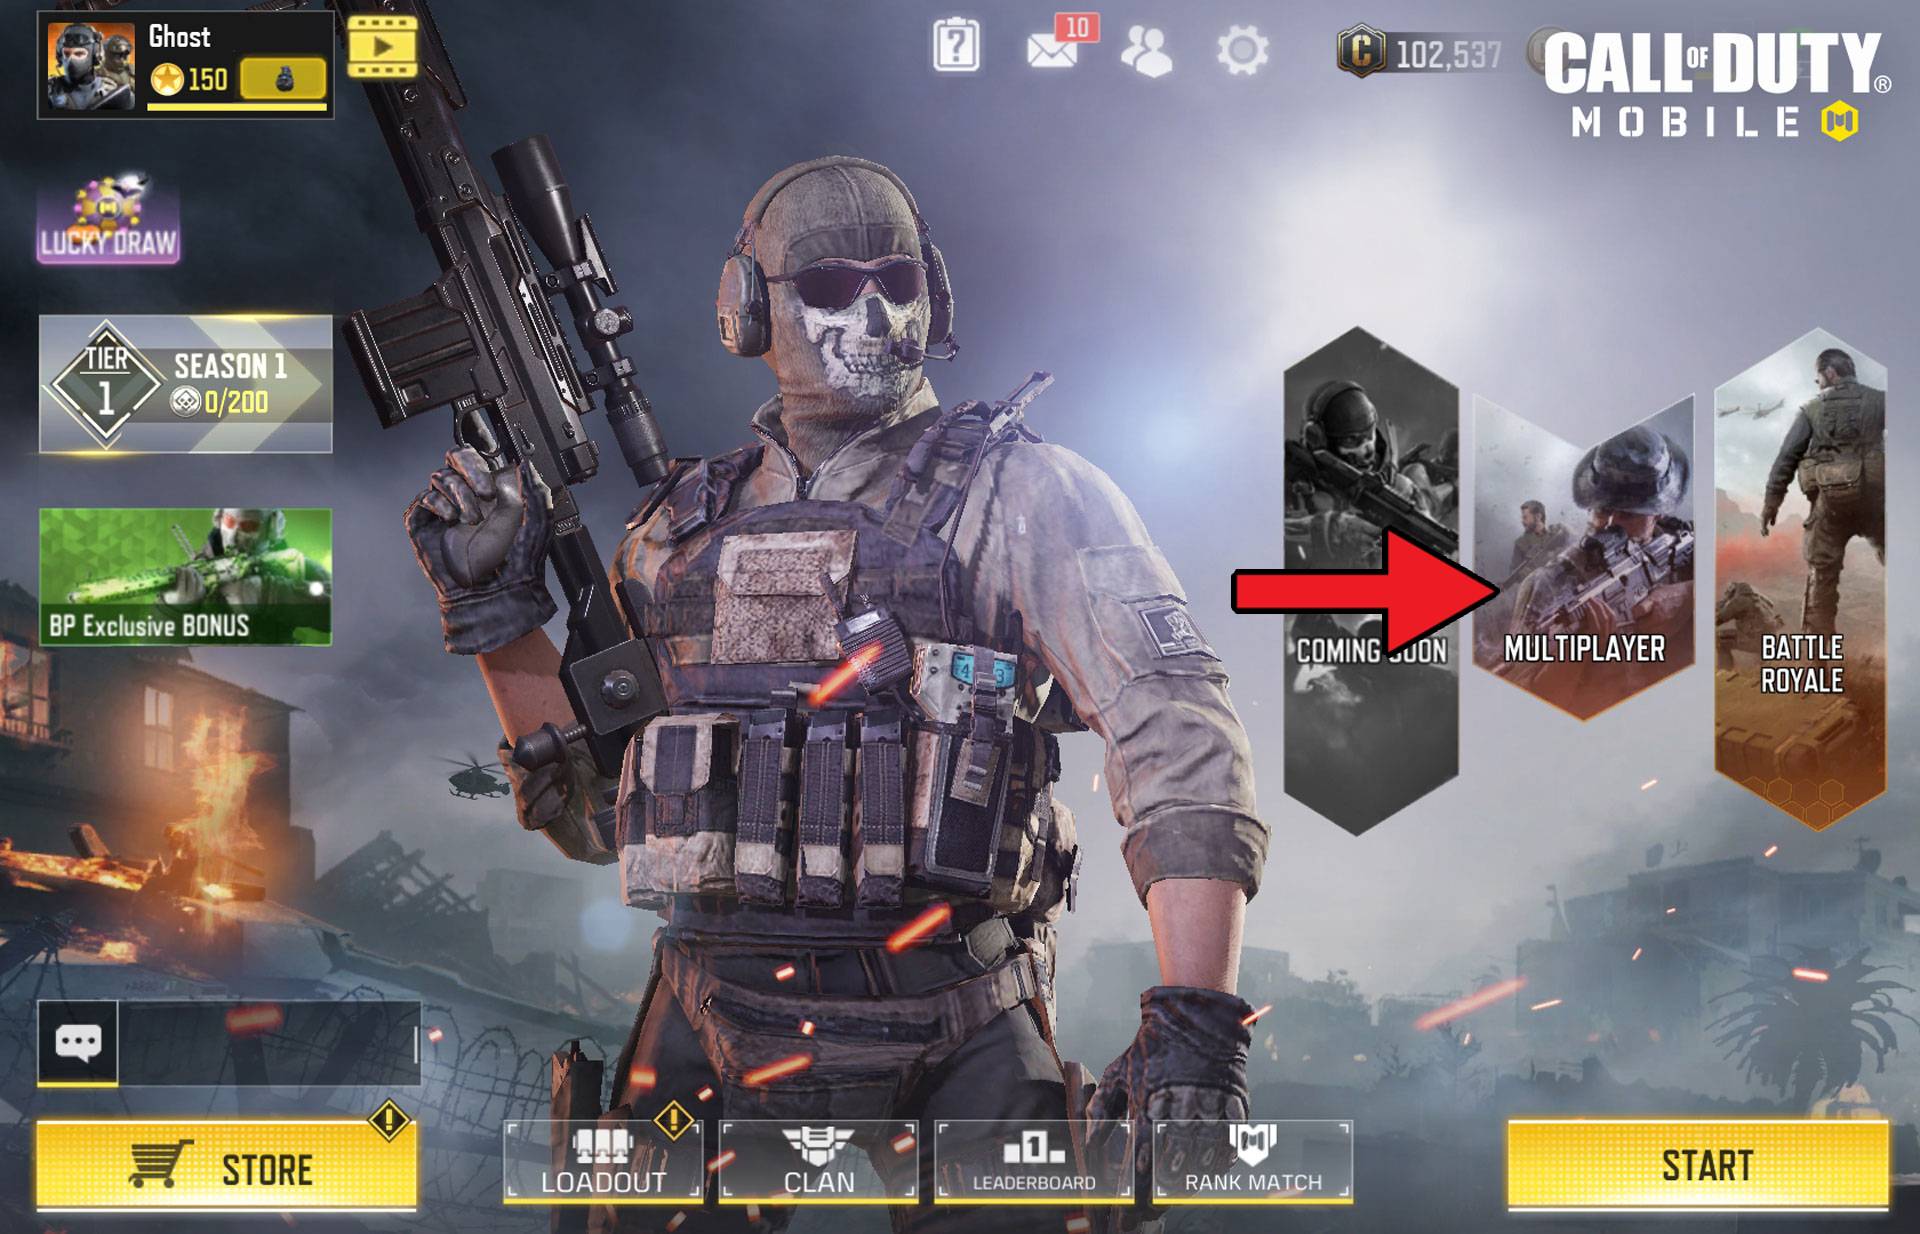 How to play 1v1 in Call of Duty Mobile Touch, Tap, Play